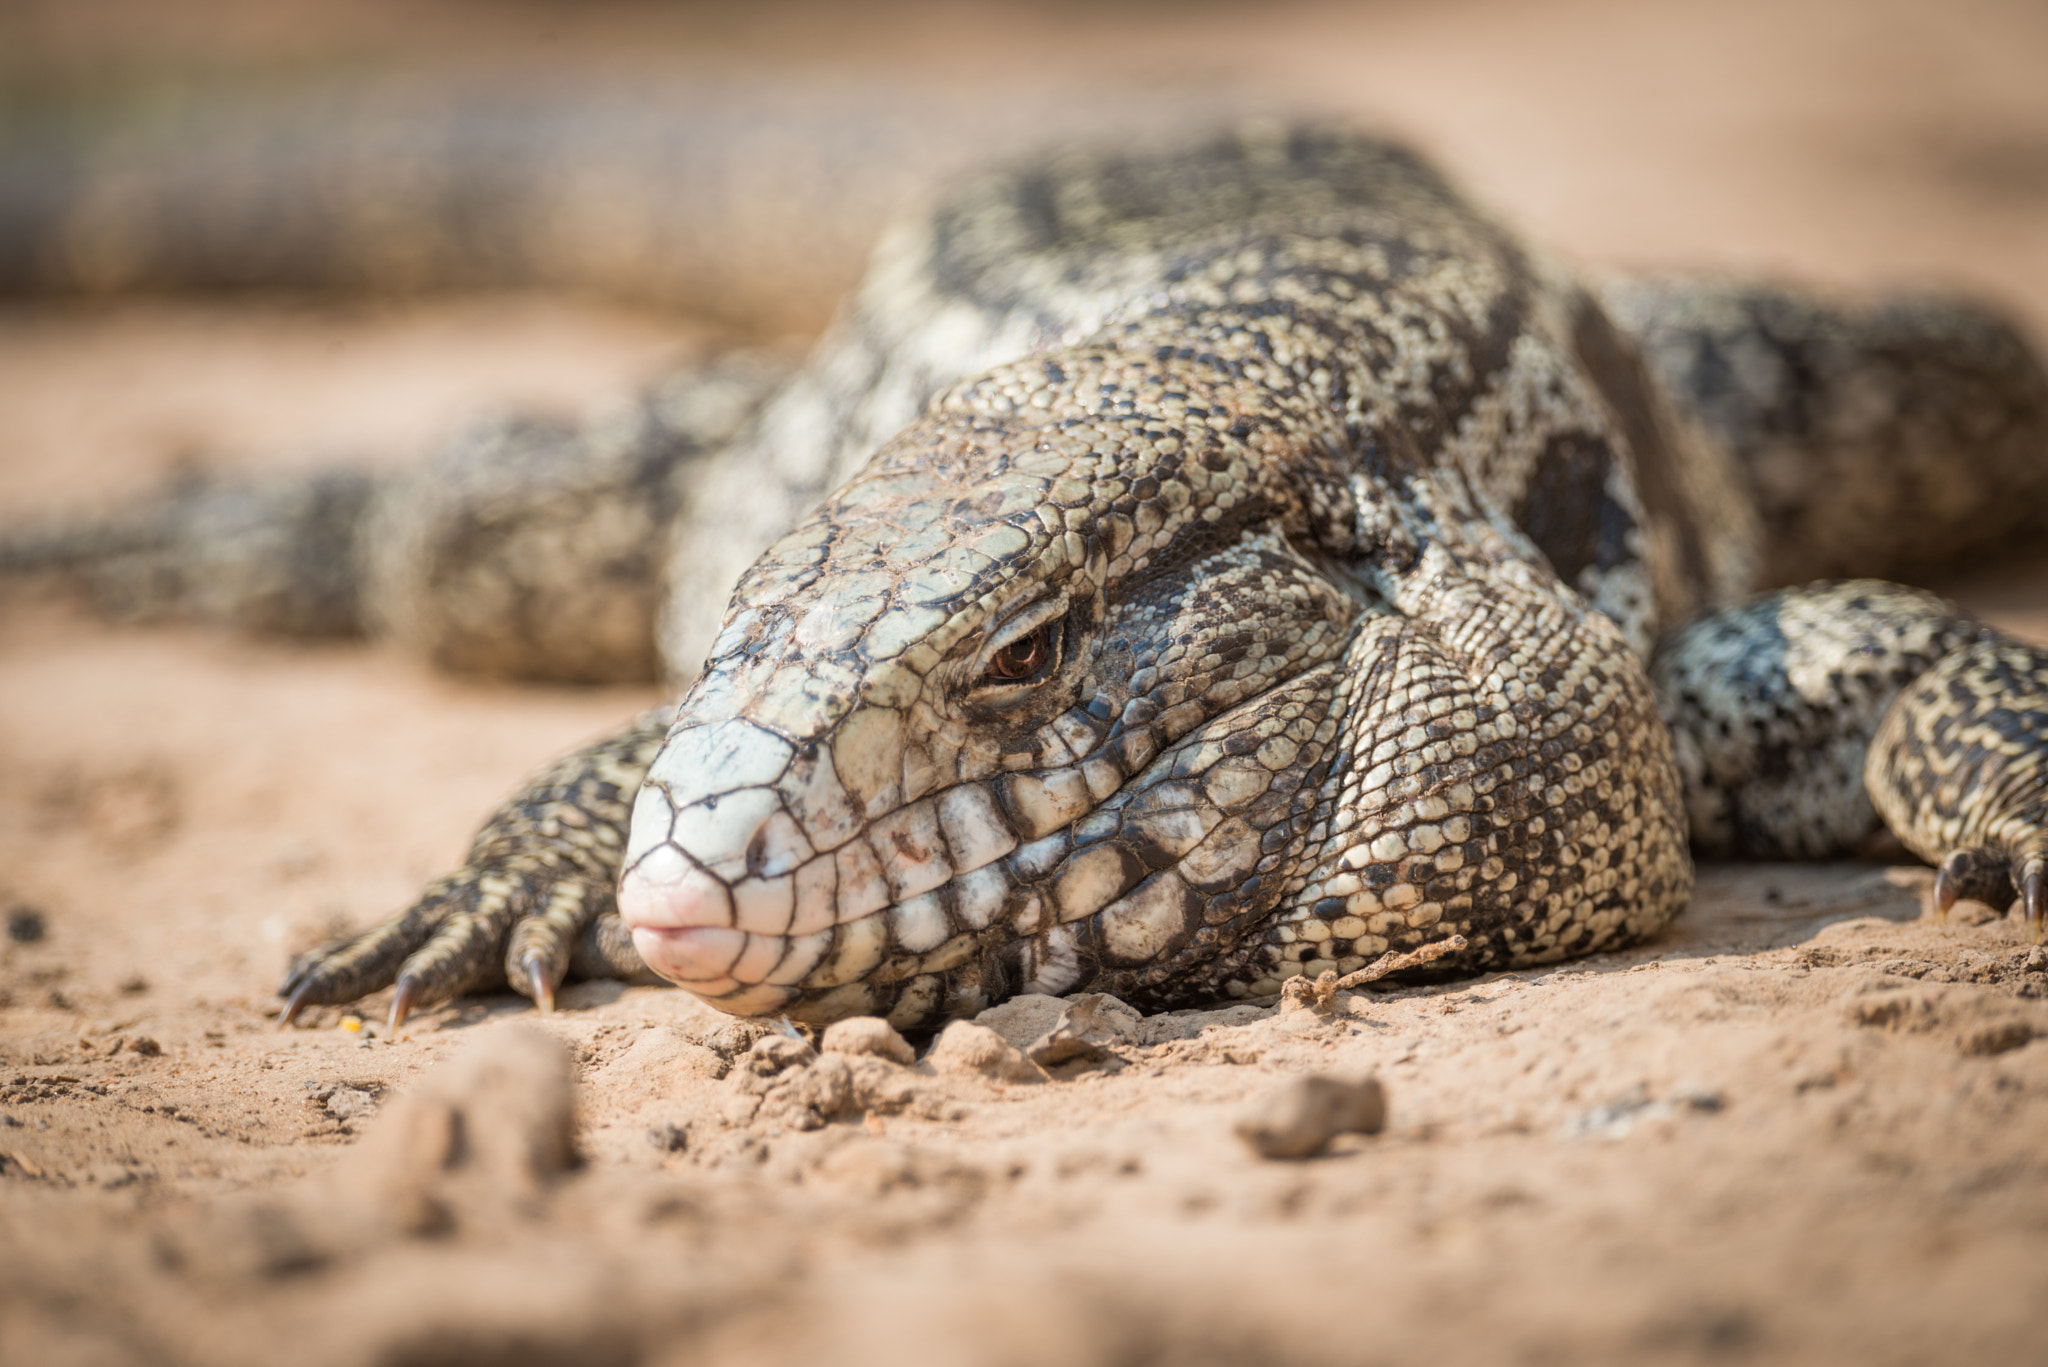 Nikon D800 sample photo. Close-up of common tegu lizard in sand photography